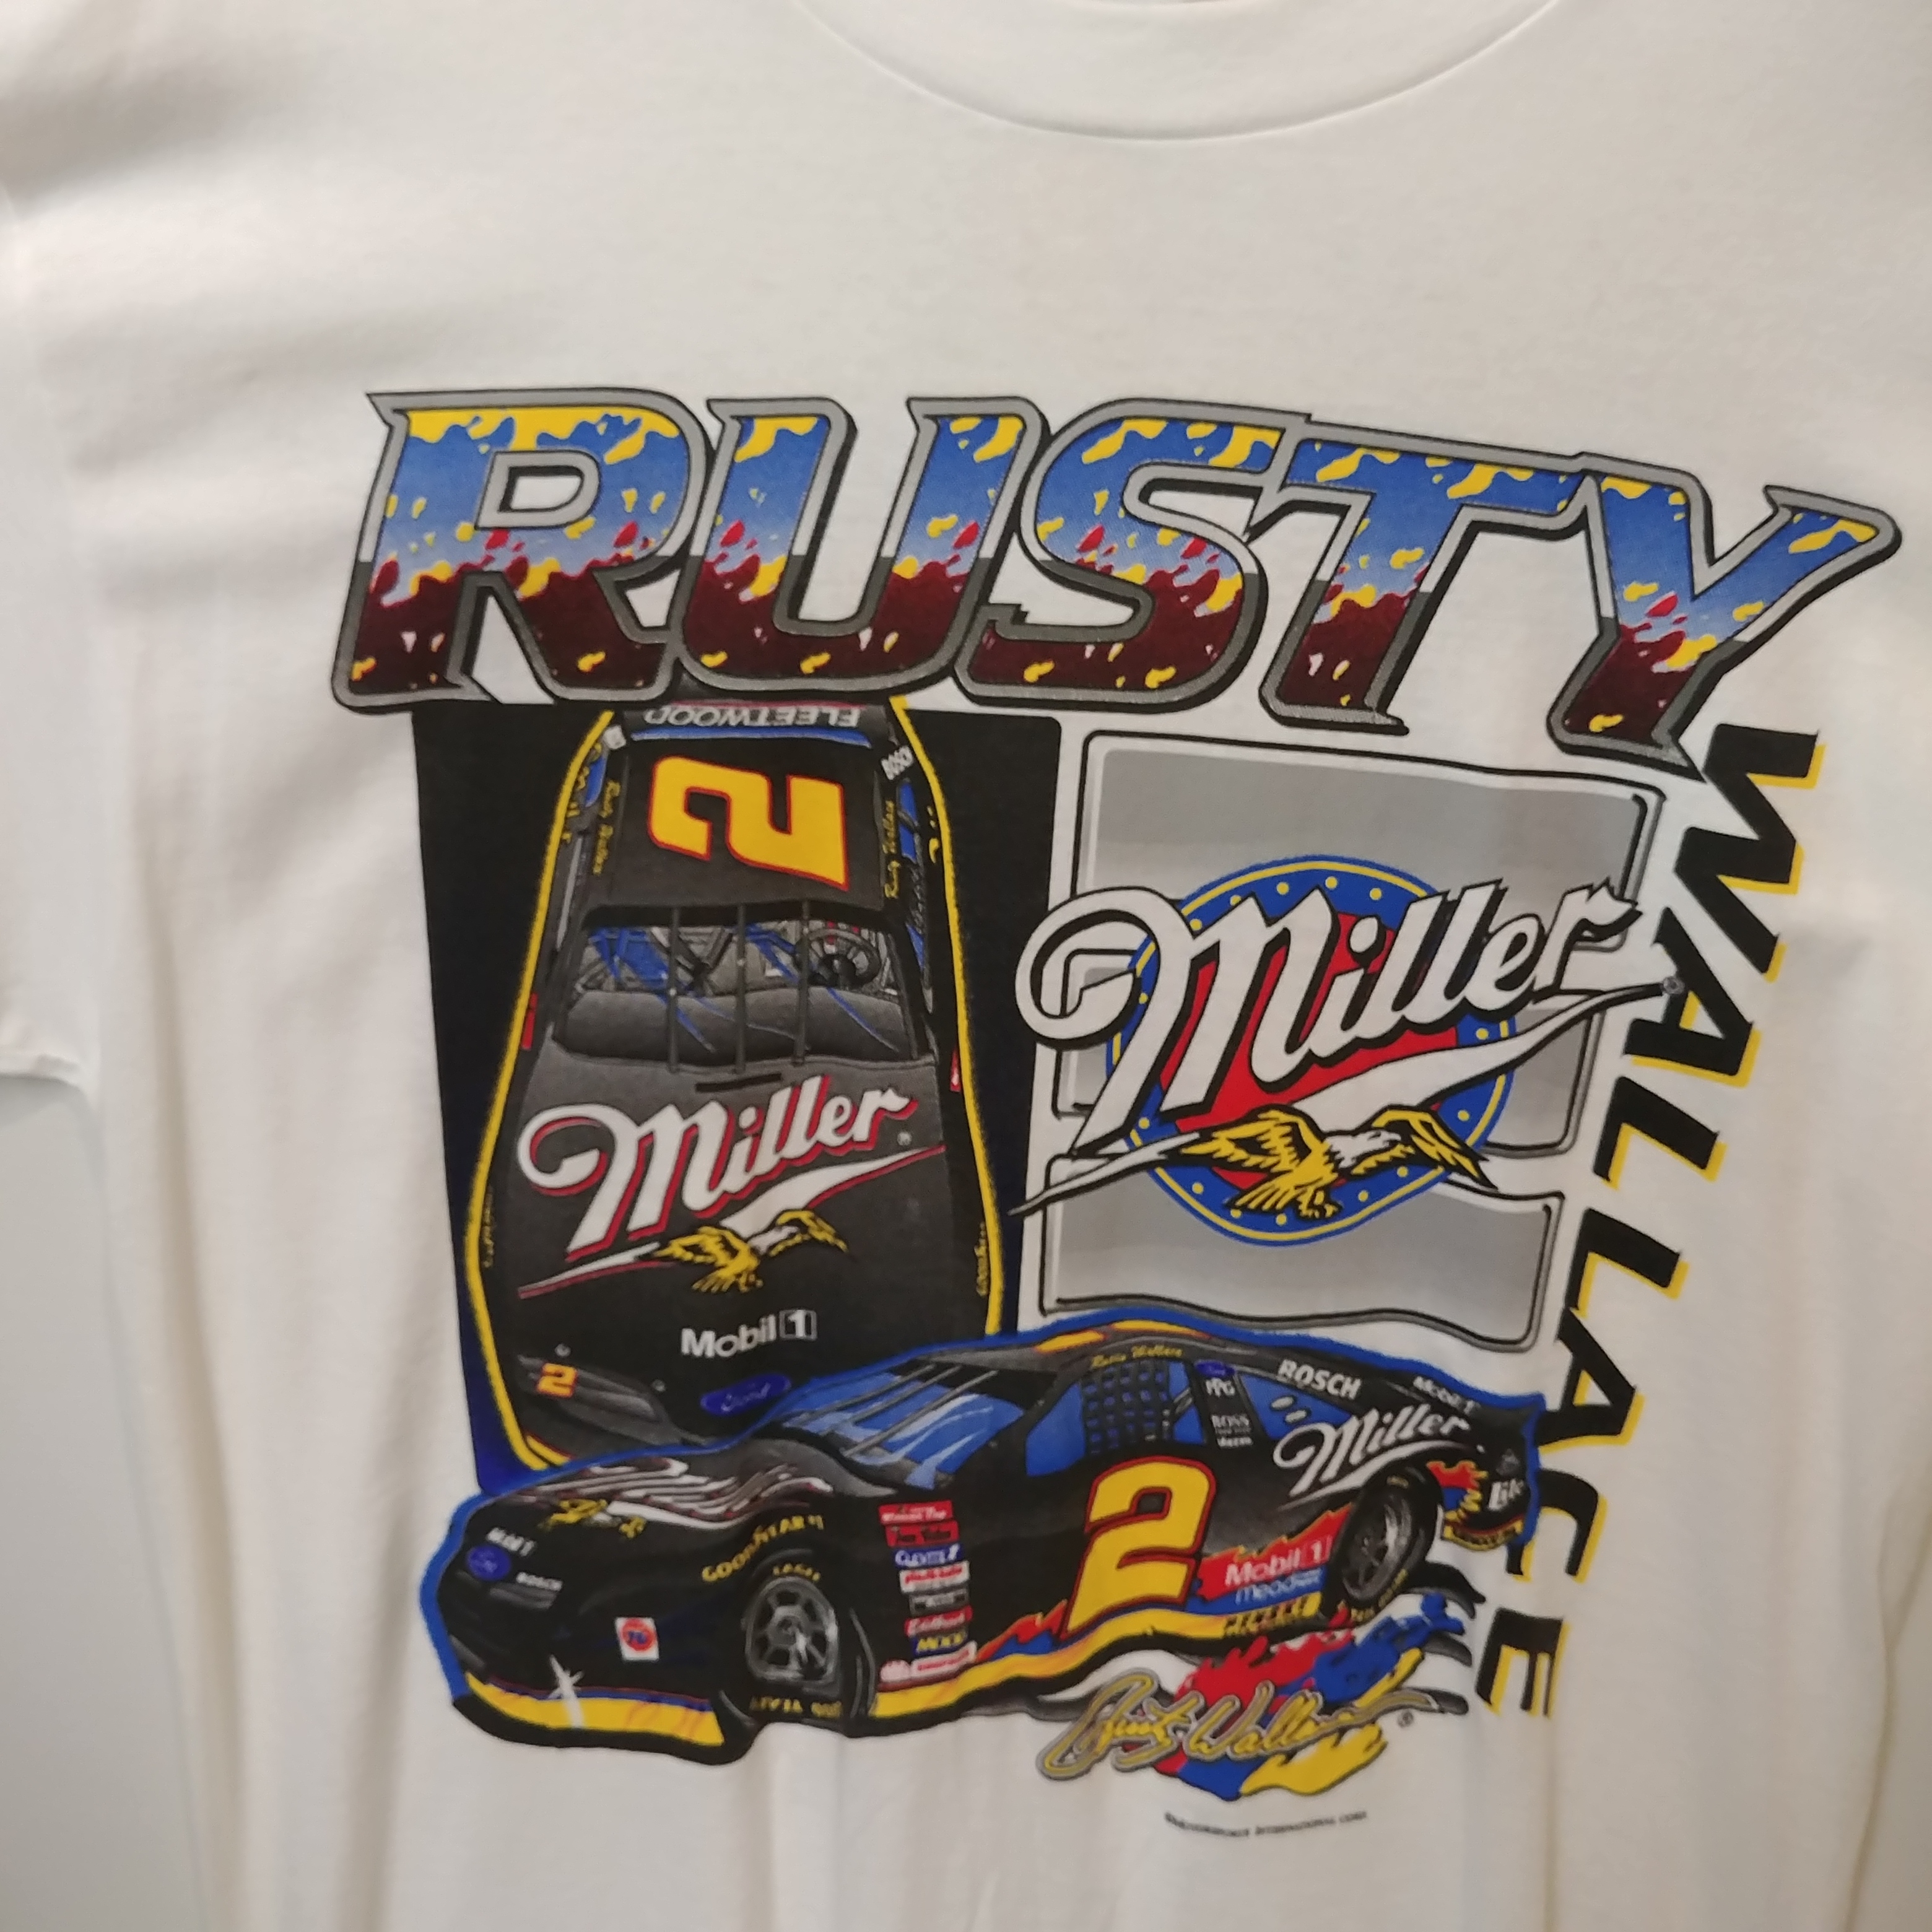 1996 Rusty Wallace Miller "Built For Speed" tee